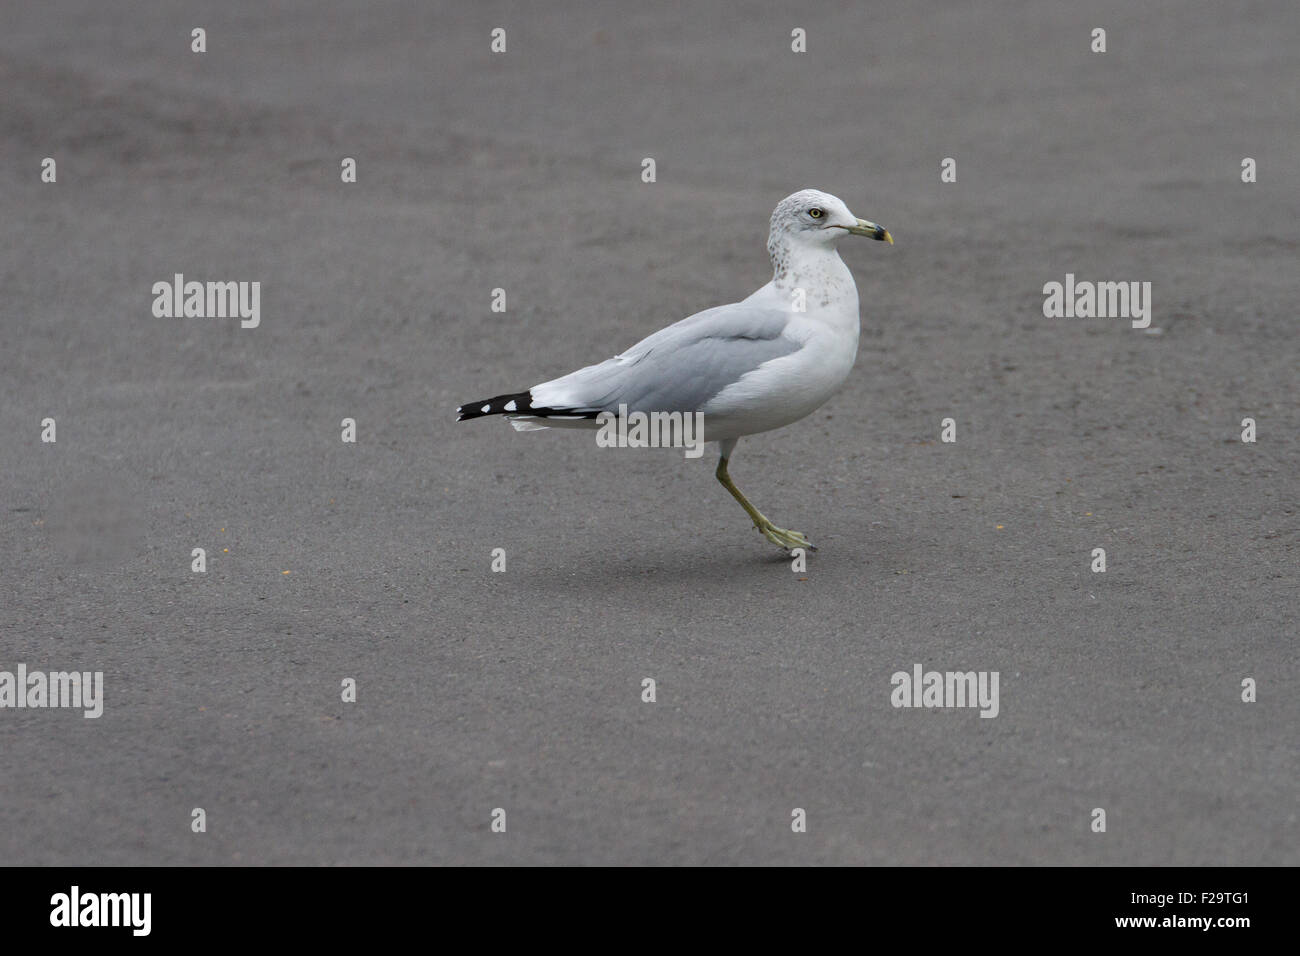 Une Jambe manquante seagull walking Banque D'Images